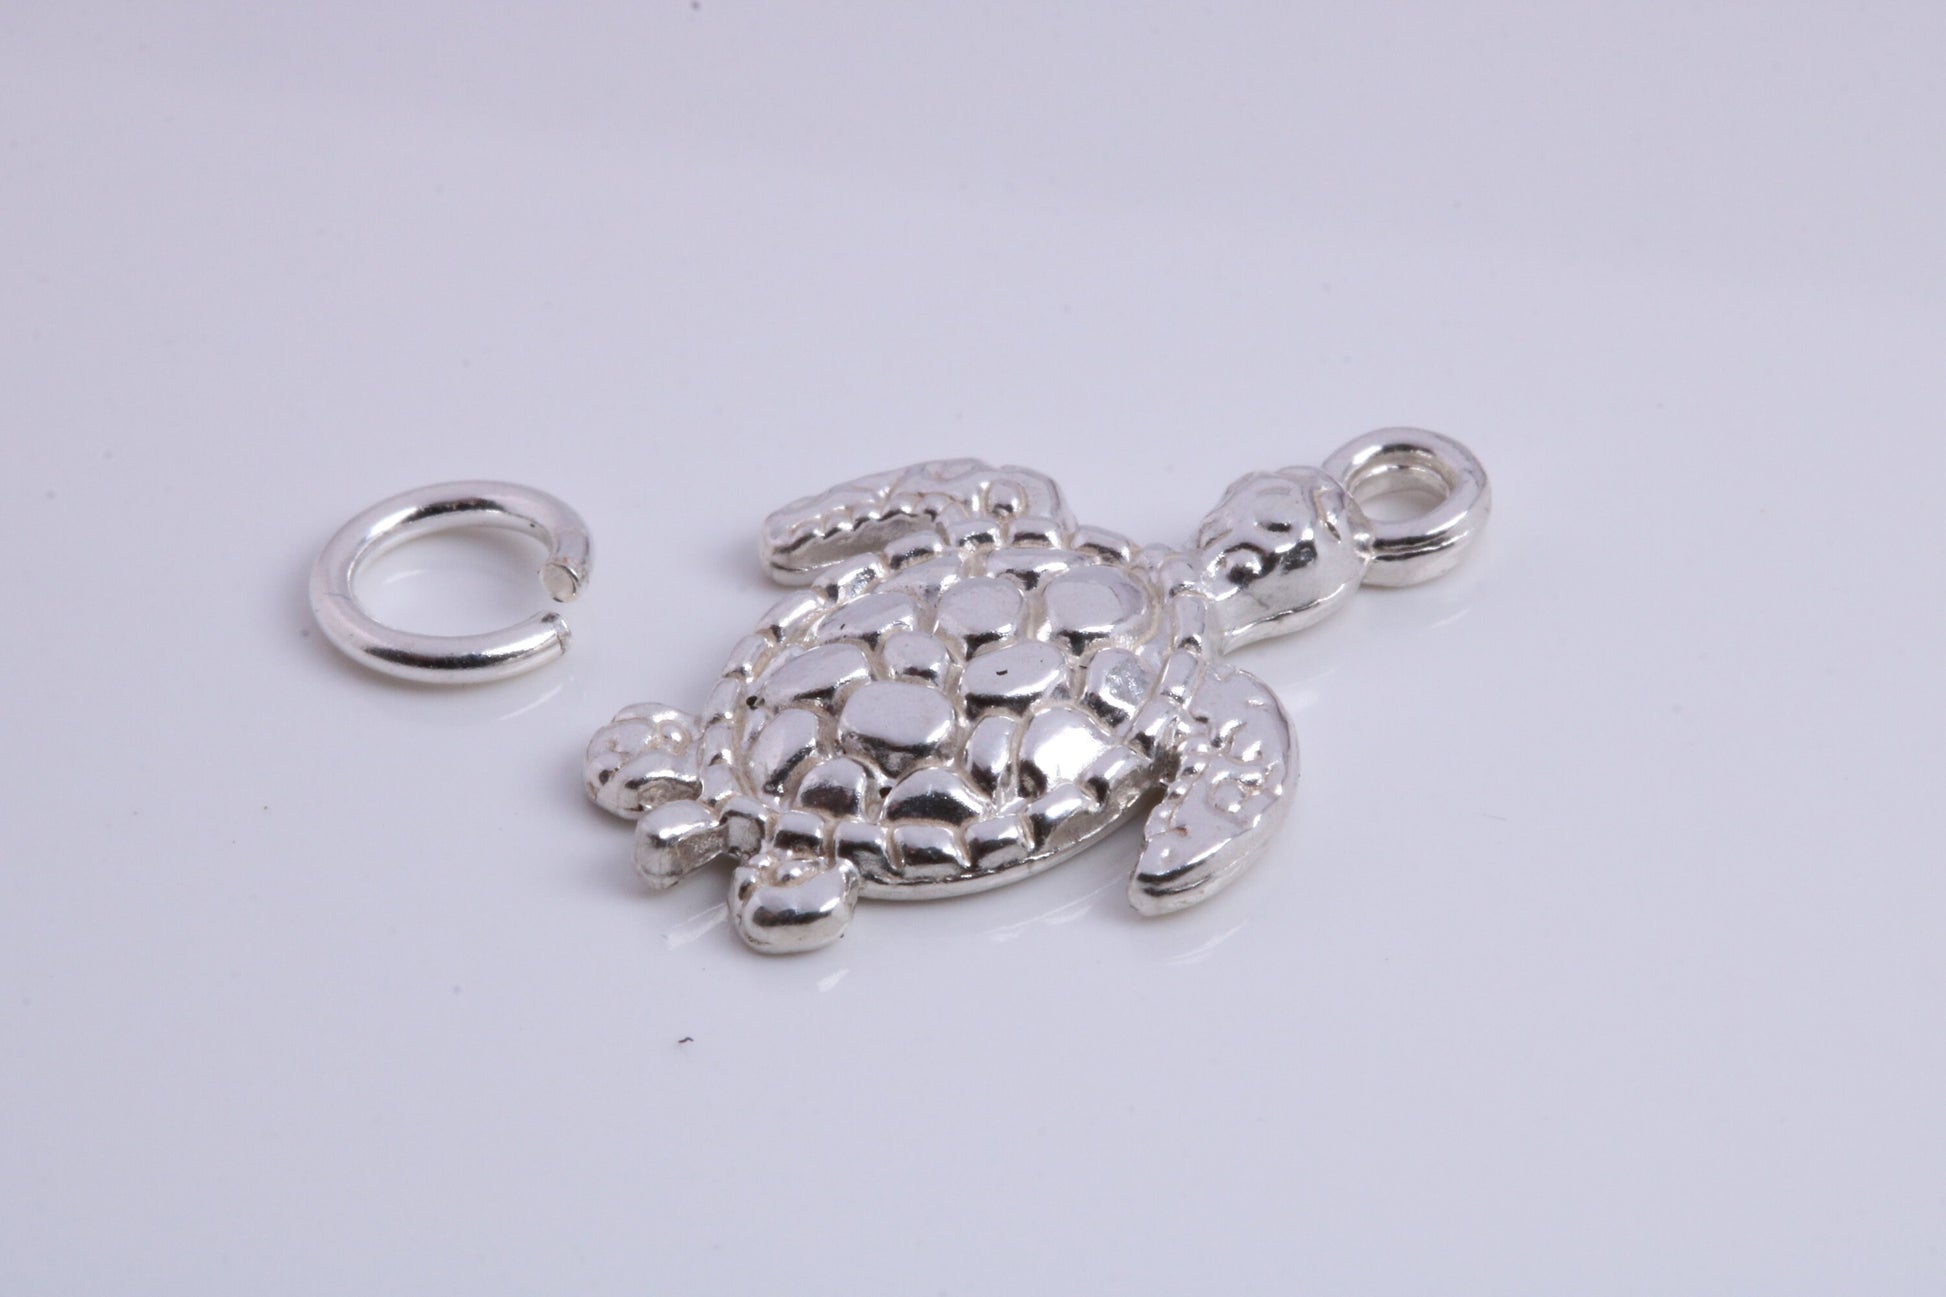 Turtle Charm, Traditional Charm, Made from Solid 925 Grade Sterling Silver, Complete with Attachment Link